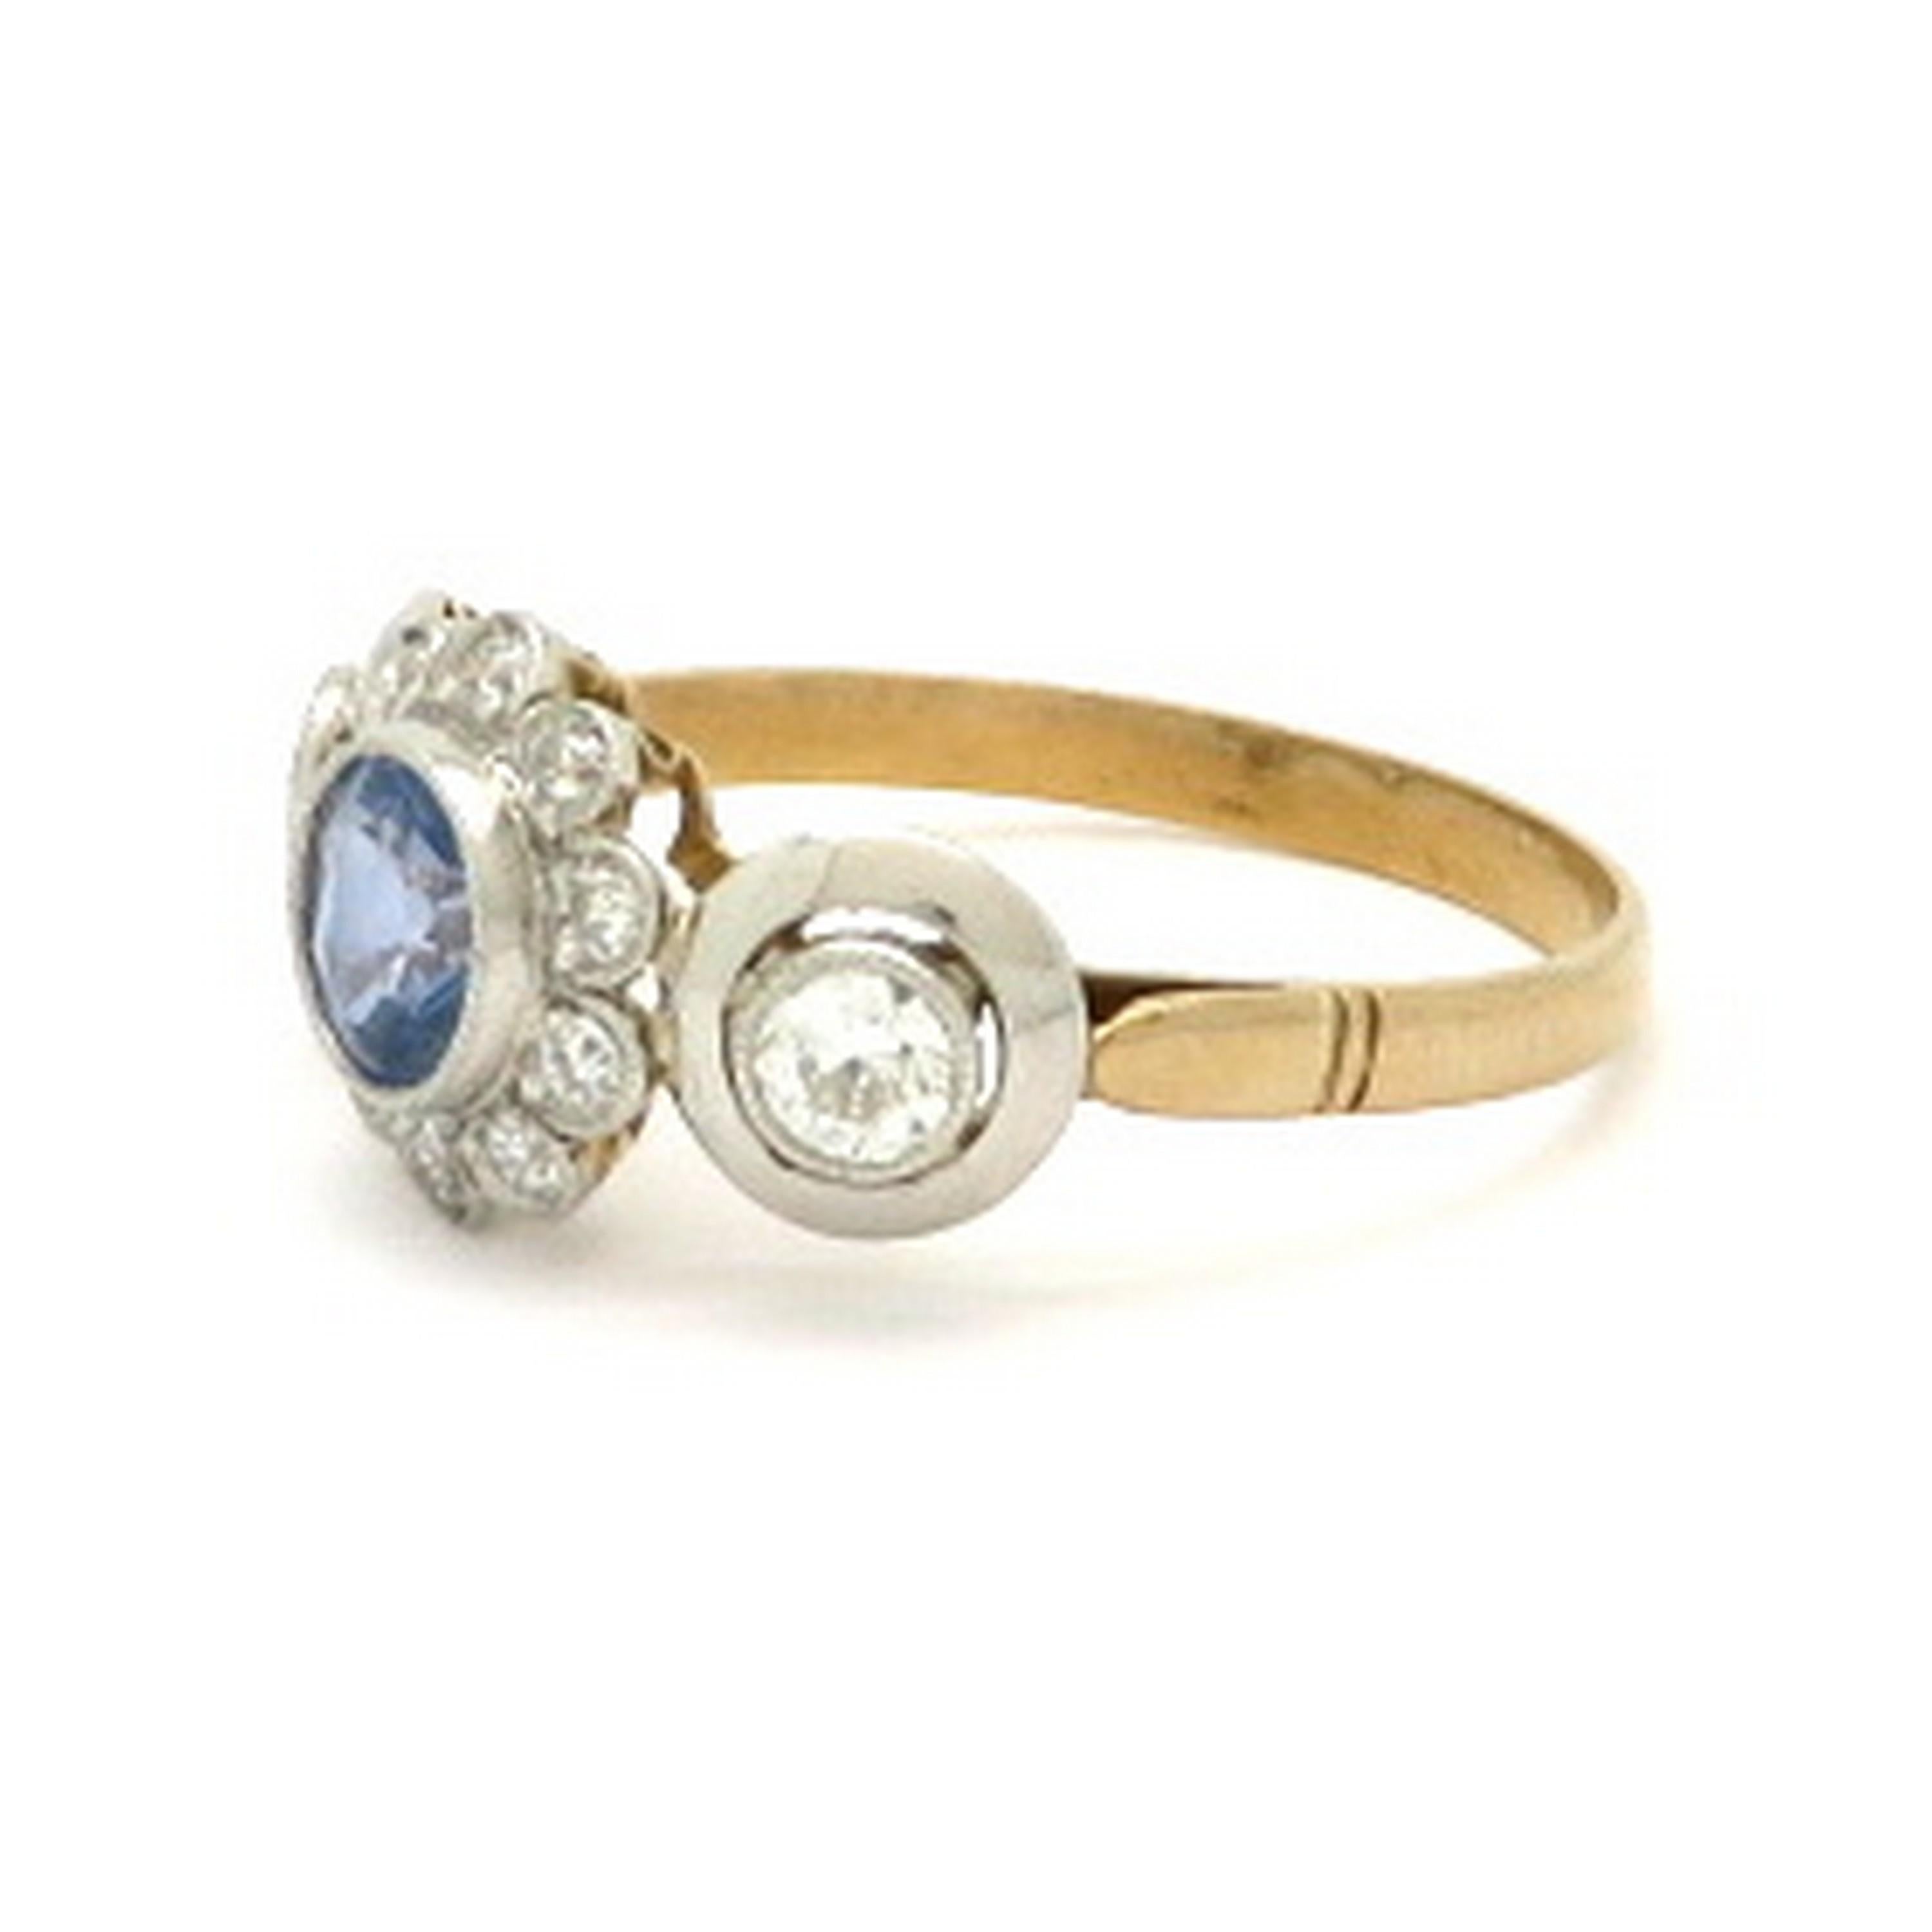 Art Deco style platinum and 18K two-tone flower sapphire and diamond ring. Showcasing one round brilliant cut light blue fine quality sapphire, milgrain bezel set, weighing approximately 0.80 carats. Interspersed with 10 Old European cut diamonds